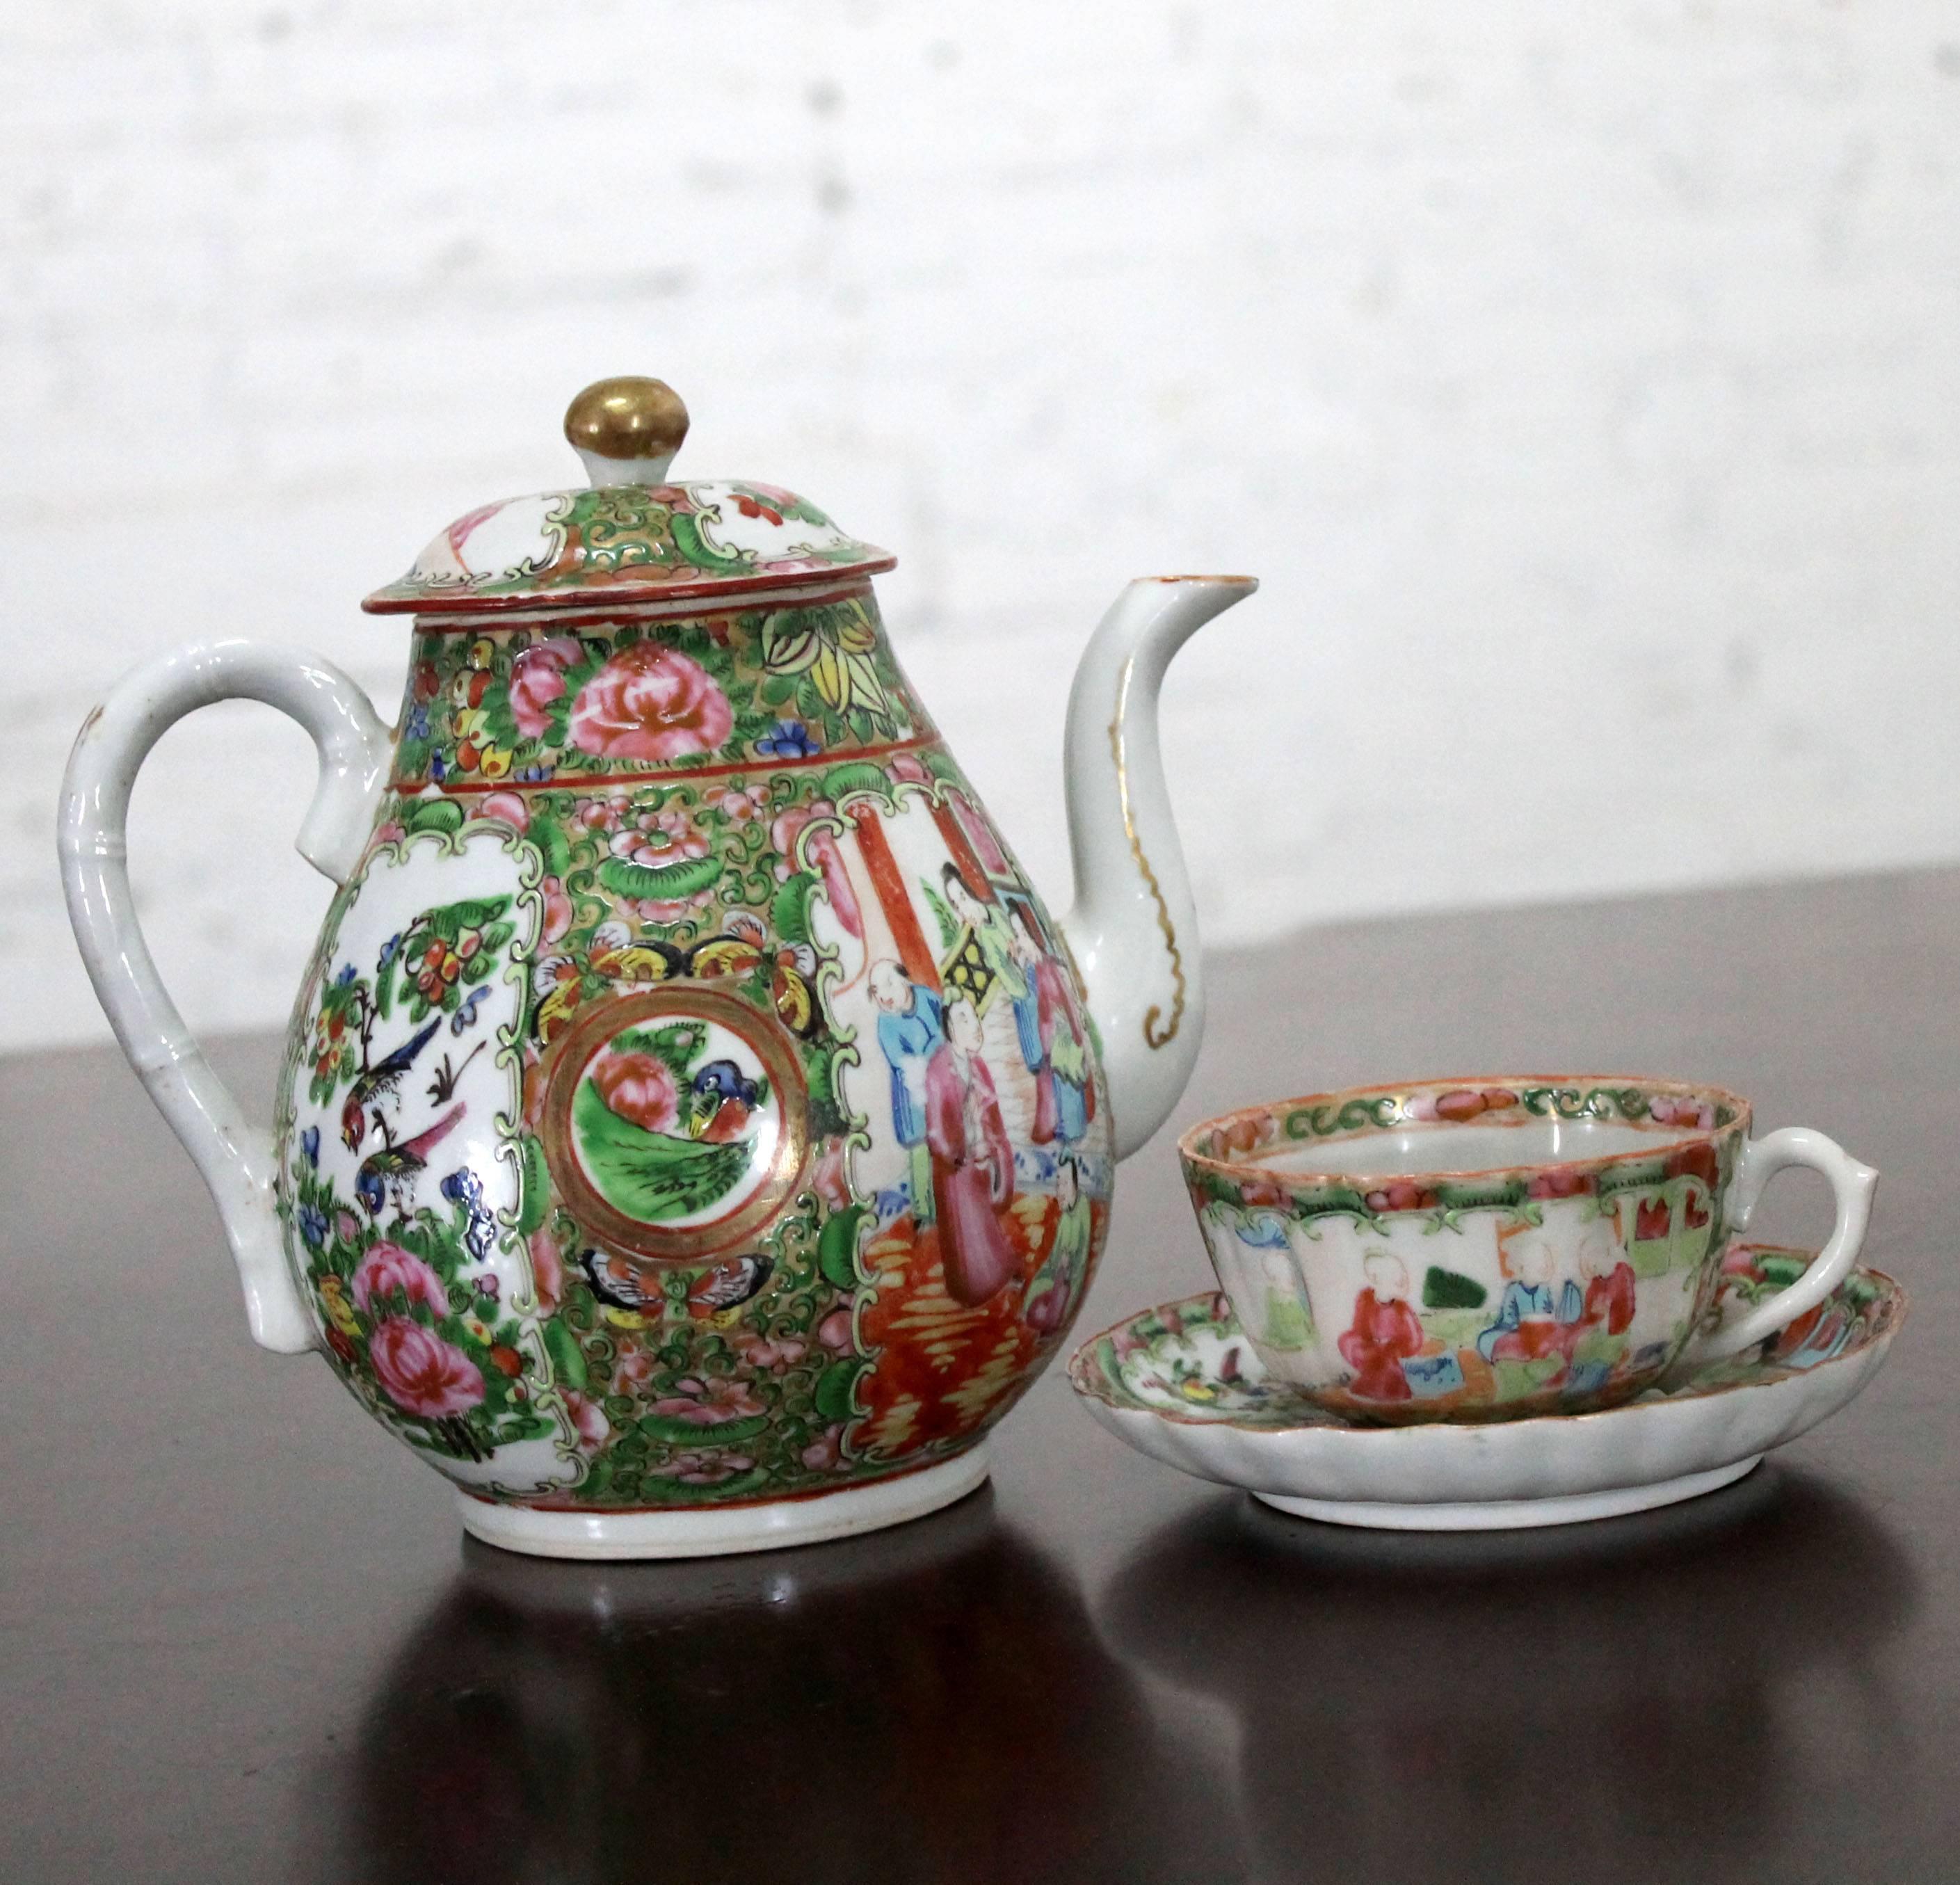 Wonderful and delicate antique Chinese rose Medallion teapot with lid and matching single teacup and saucer in the traditional medallion design of village scenes, floral and birds. Qing dynasty circa 1850-1890 and in wonderful antique condition. The